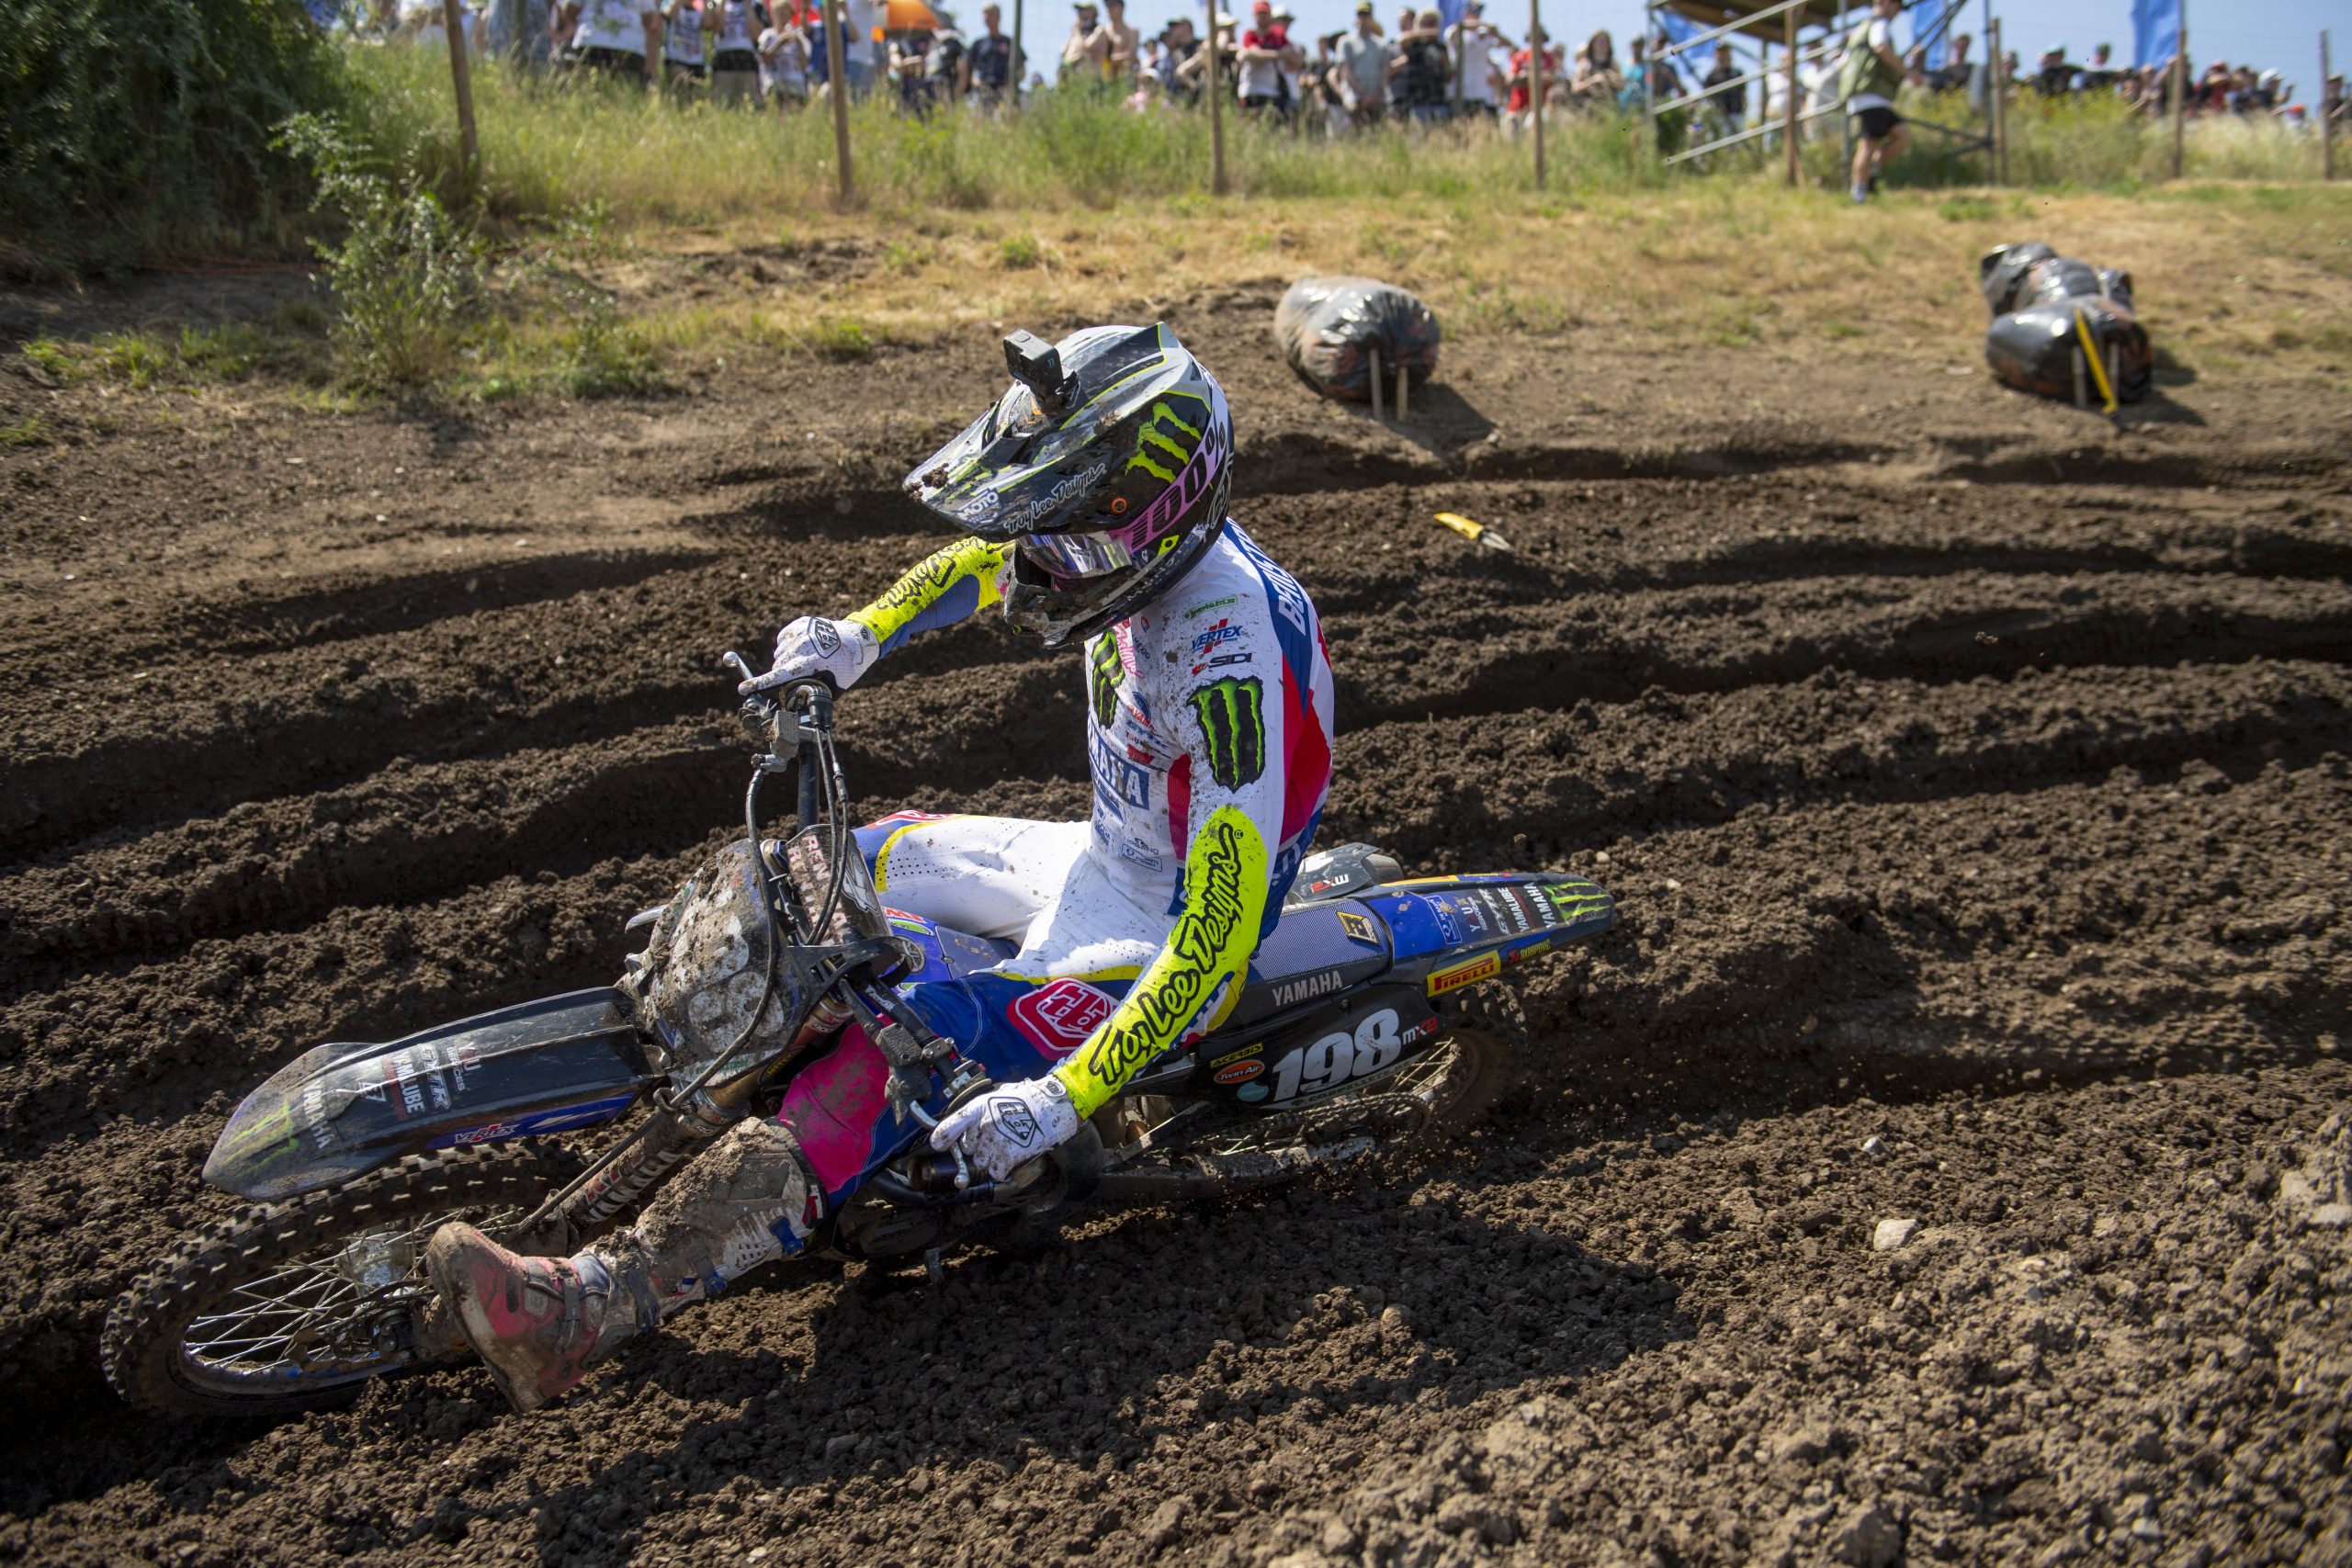 Benistant Adds Sixth Podium Finish to MX2 Title Campaign in Germany